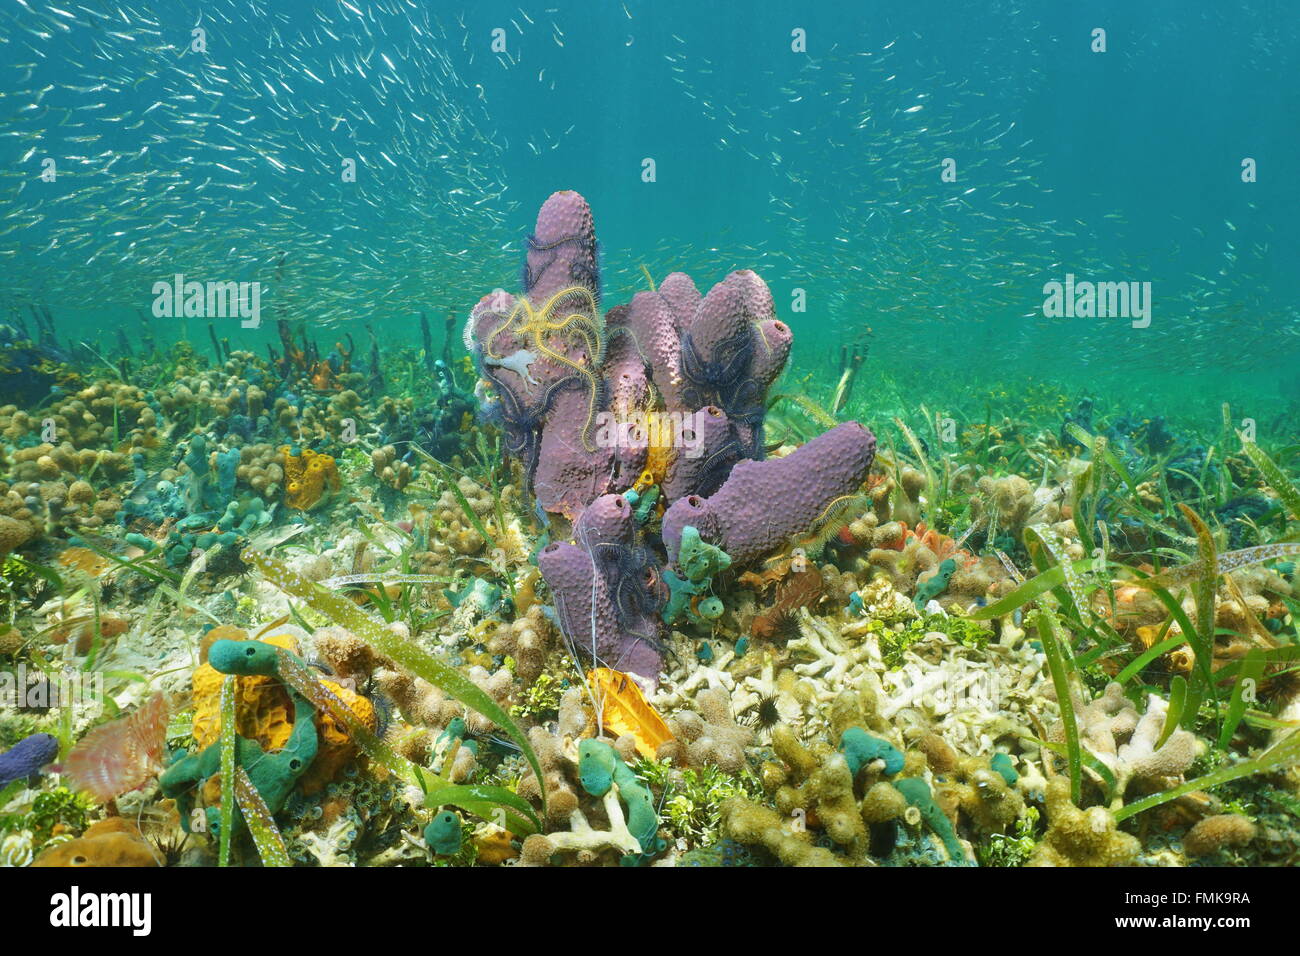 Underwater marine life on the seabed, branching tube sponge with brittle stars and juvenile fish shoal, Caribbean sea Stock Photo